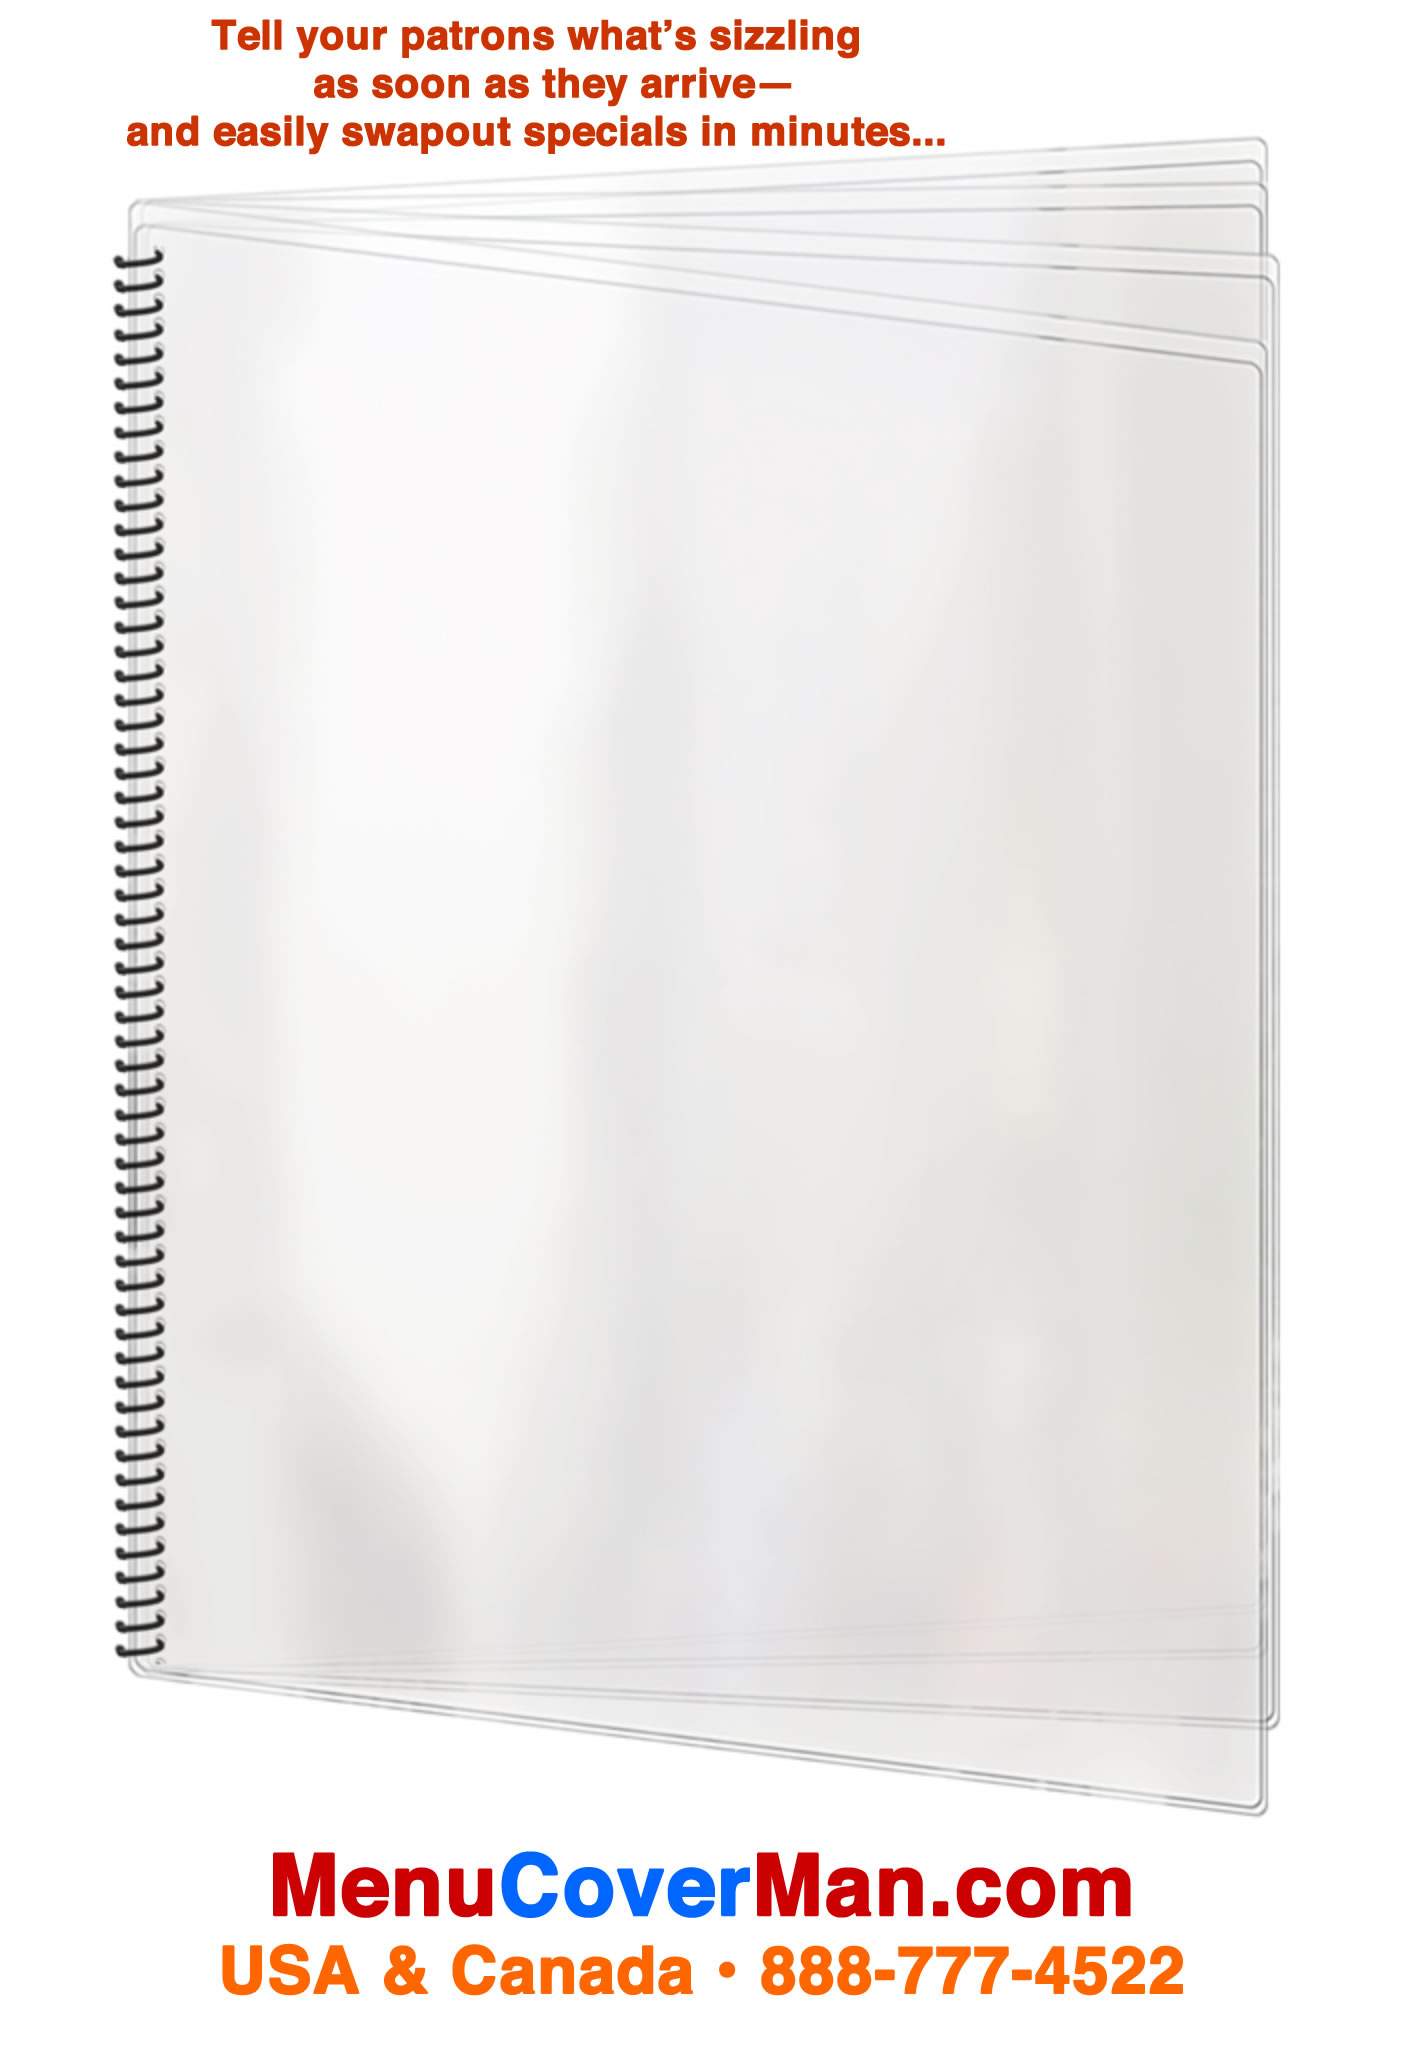 Large spiral-bound-all-clear-menu-covers-for-quick-swap-our-of-specials.